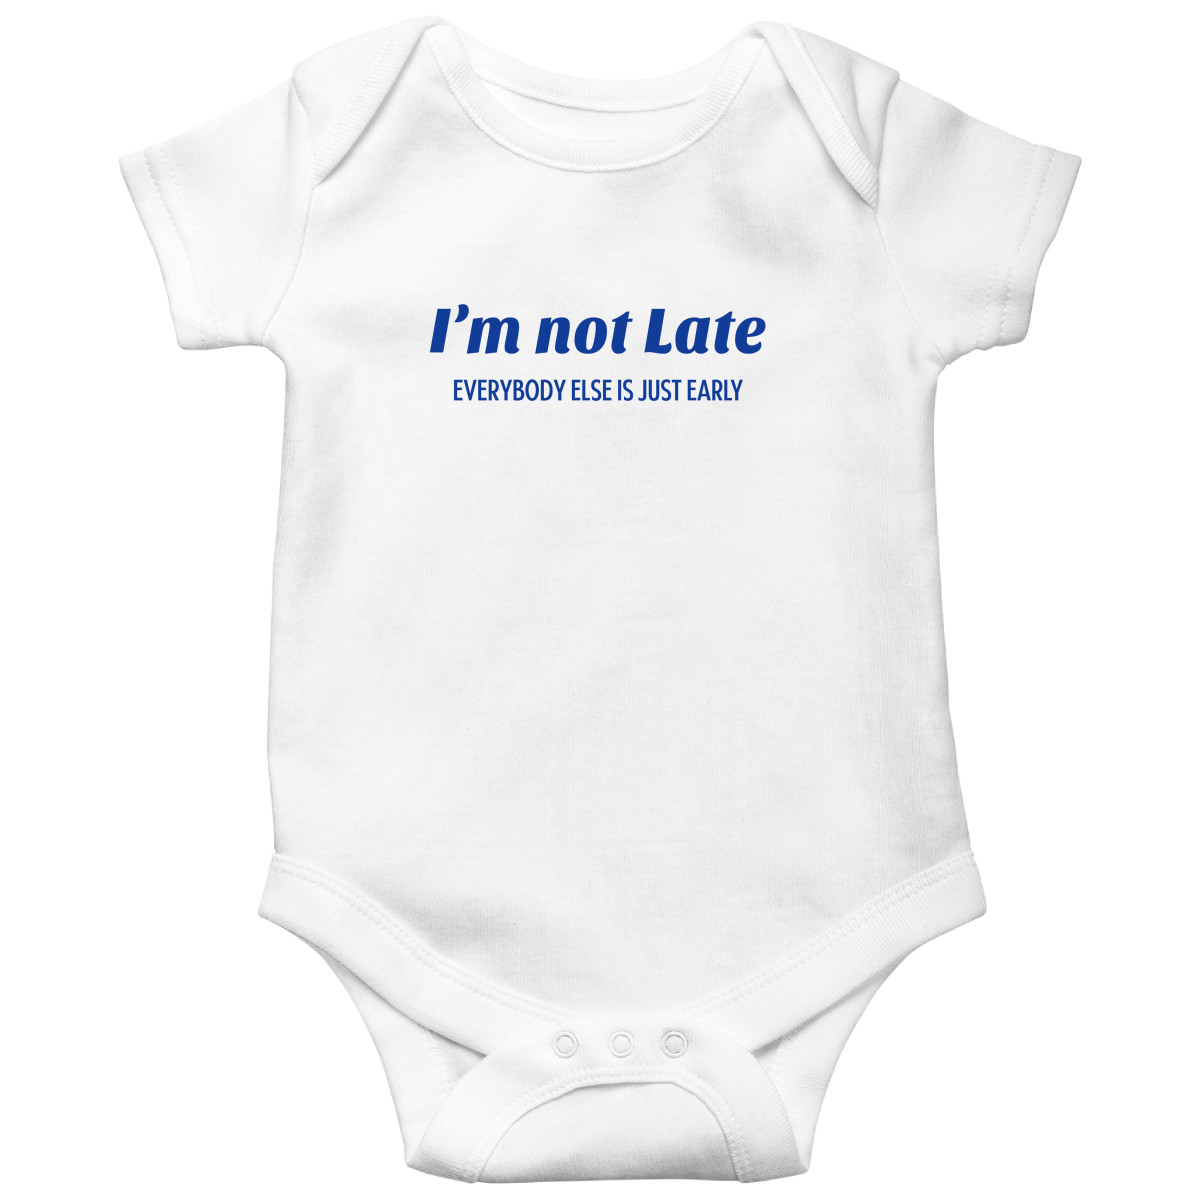 I’m not late everybody else is just early Baby Bodysuits | White